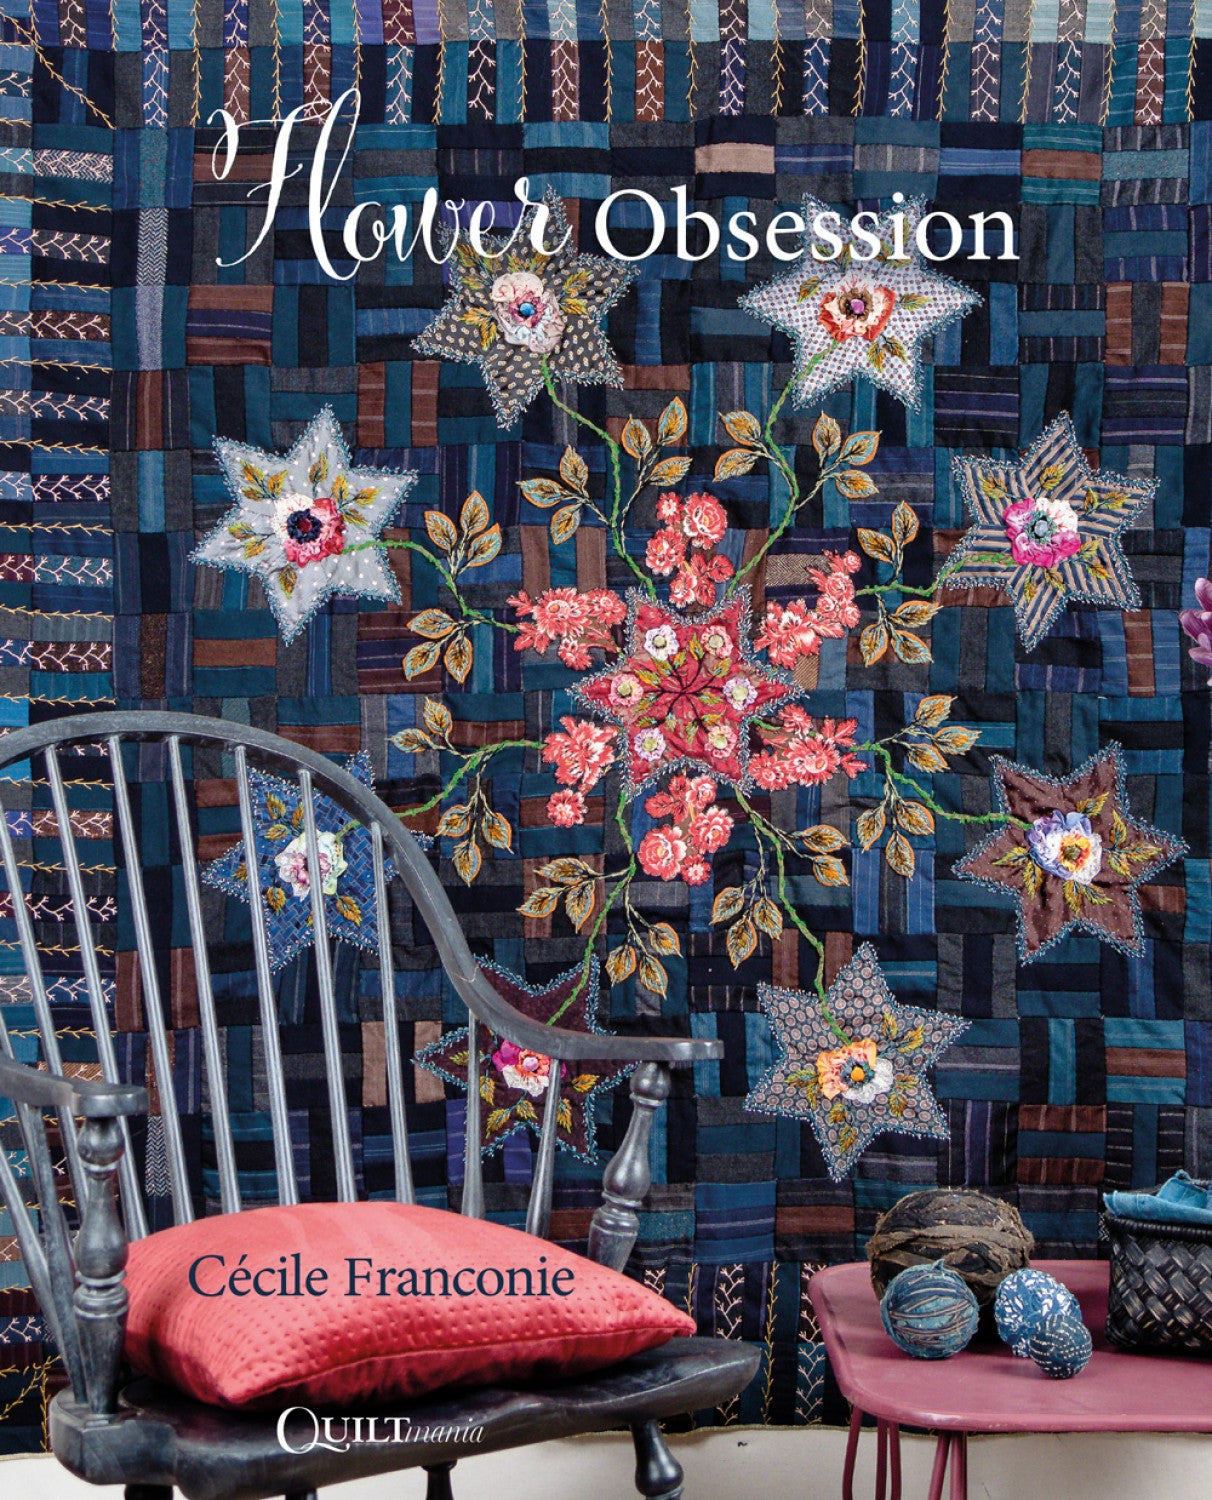 Flower Obsession by Cecile Francnie